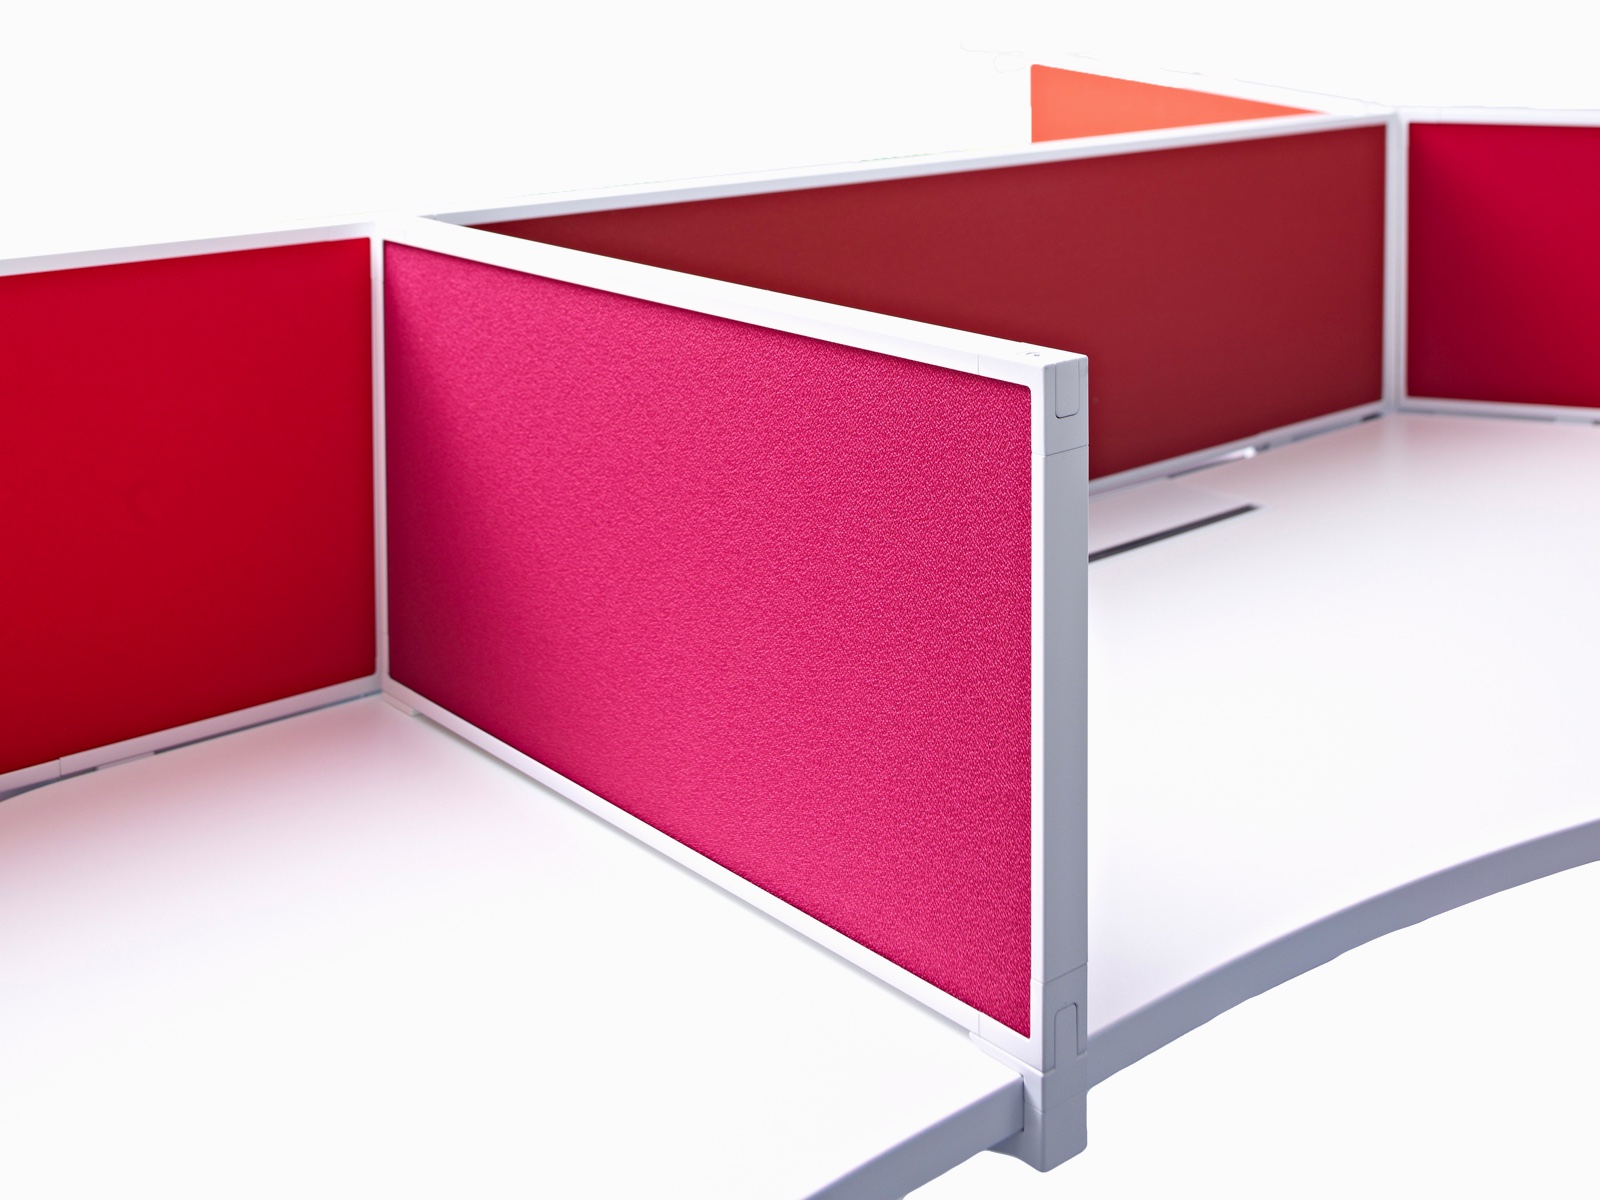 Close-up of the framed red fabric, delineation privacy screen that's placed on top of a work surface to divide desk space.